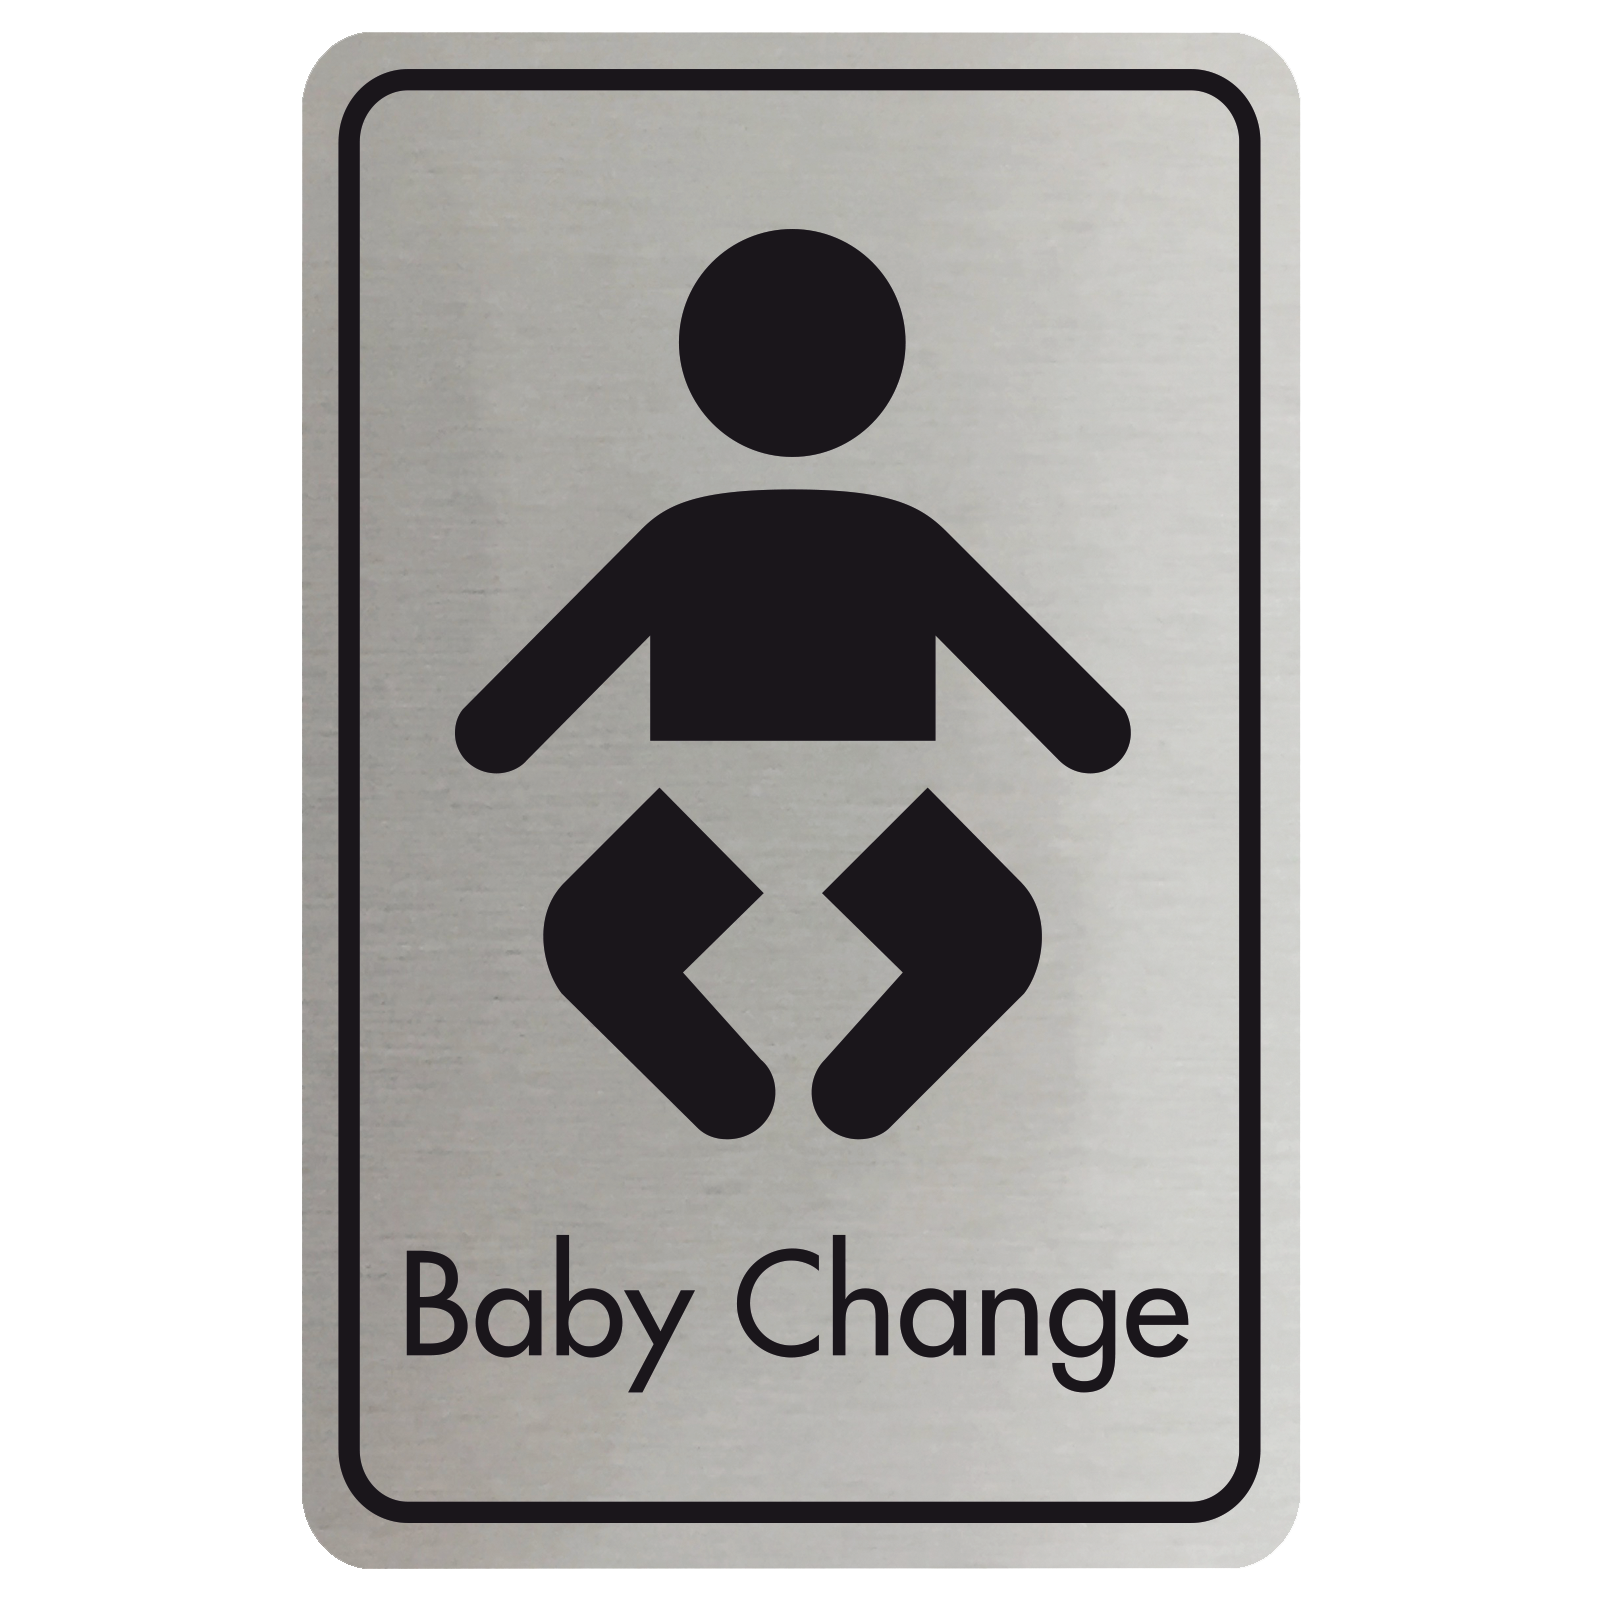 Large Baby Changing Door Sign - Black on Silver